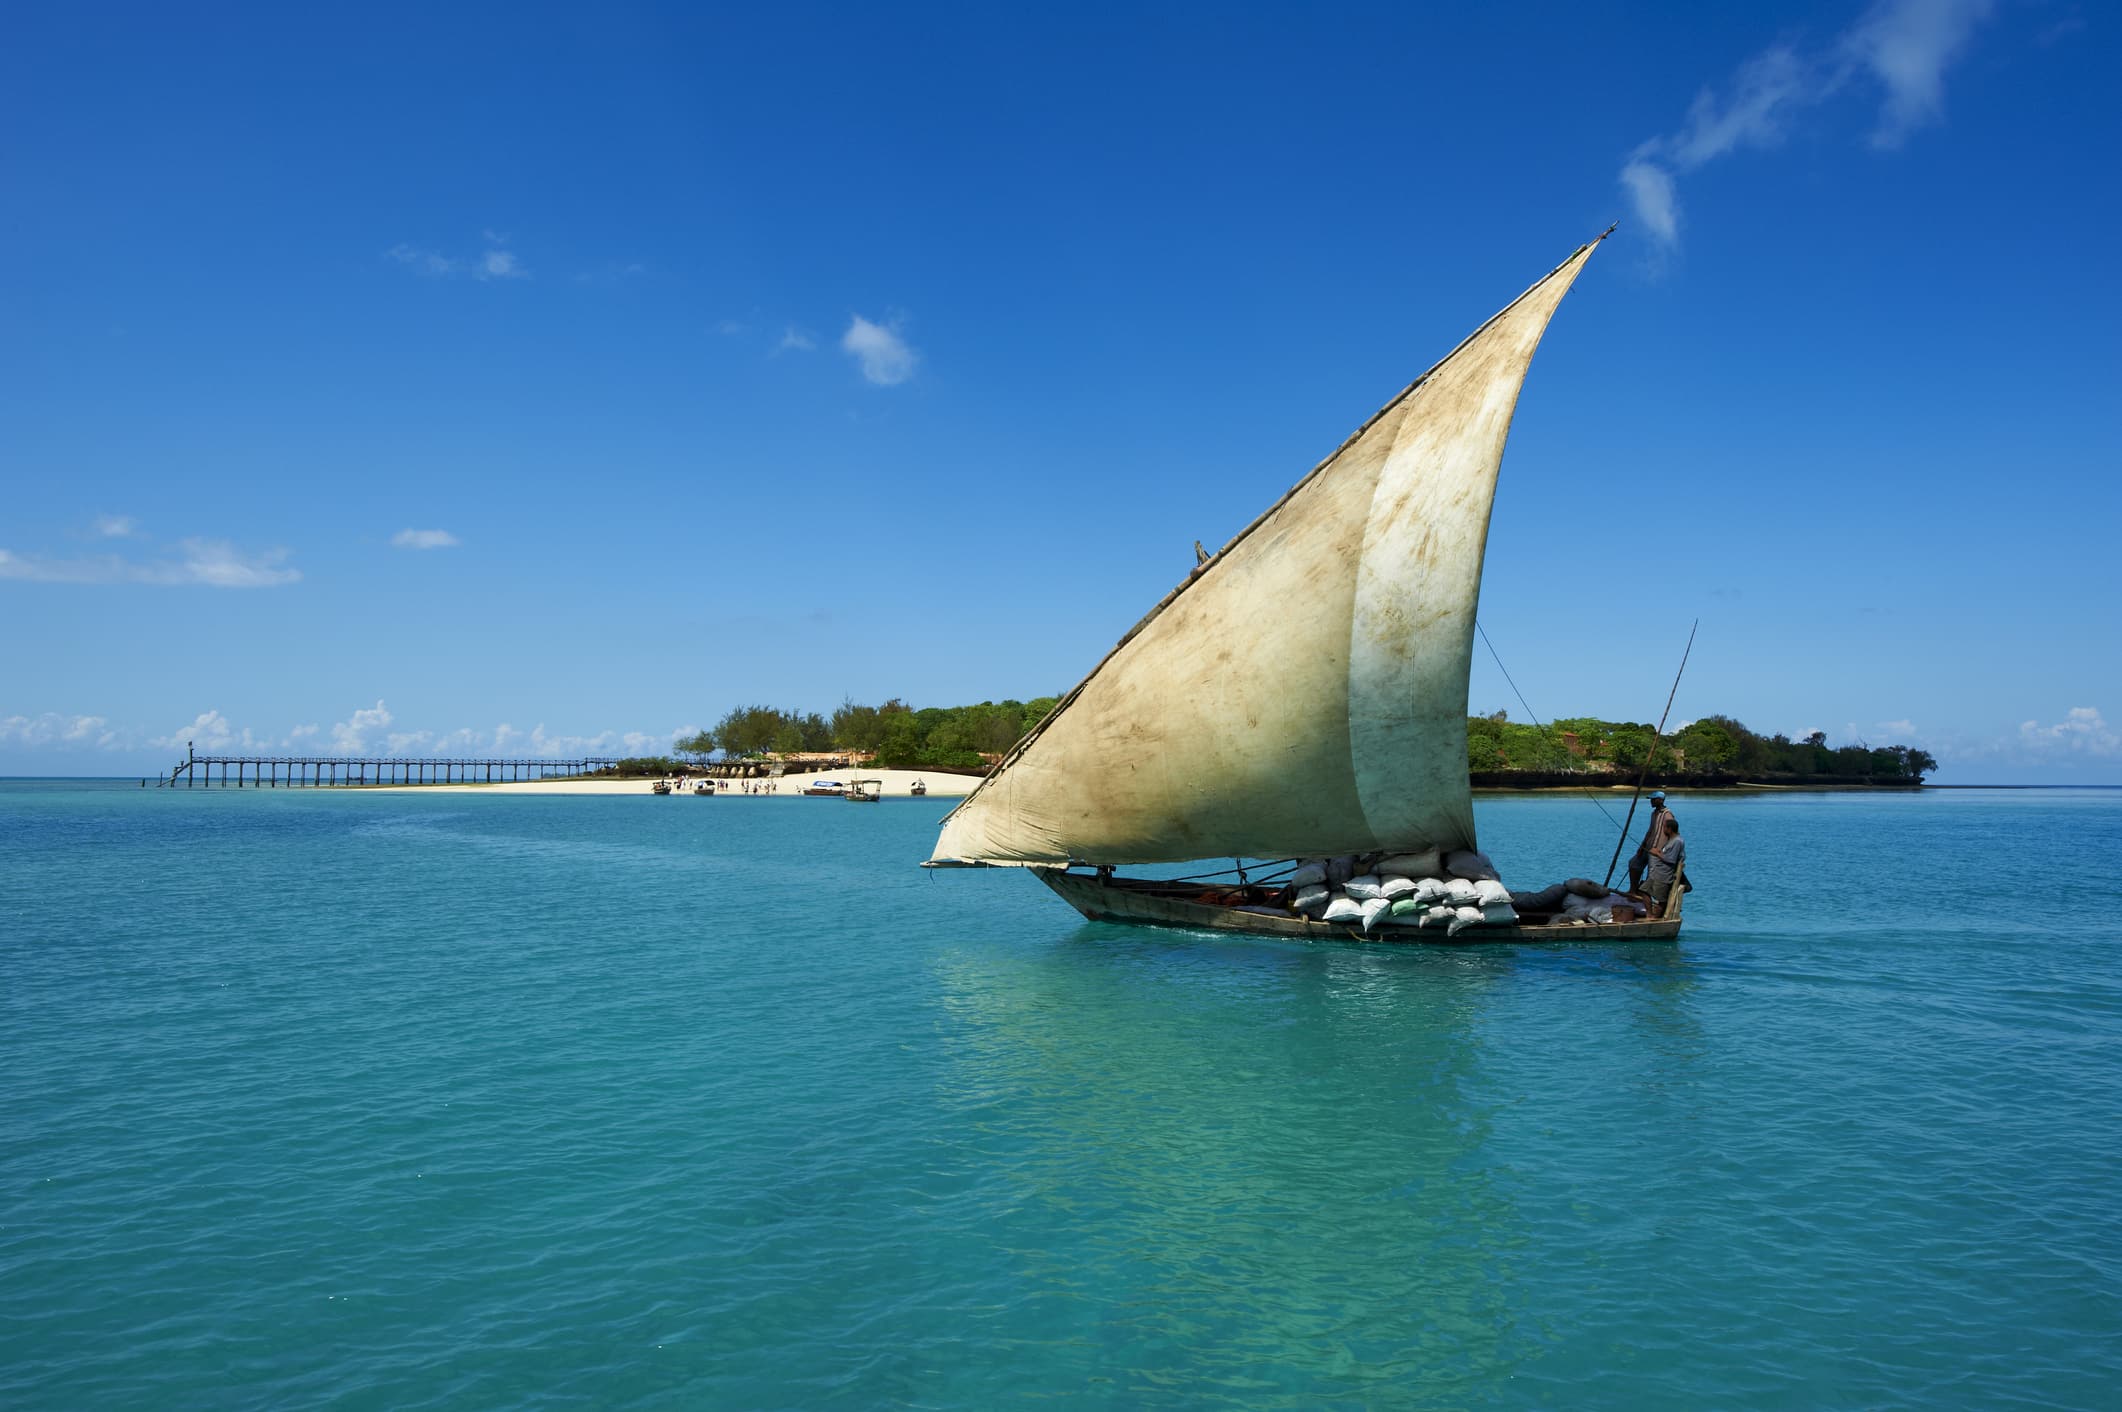 Zanzibar records a staggering Sh3.2 trillion in investment funds for its blue economy